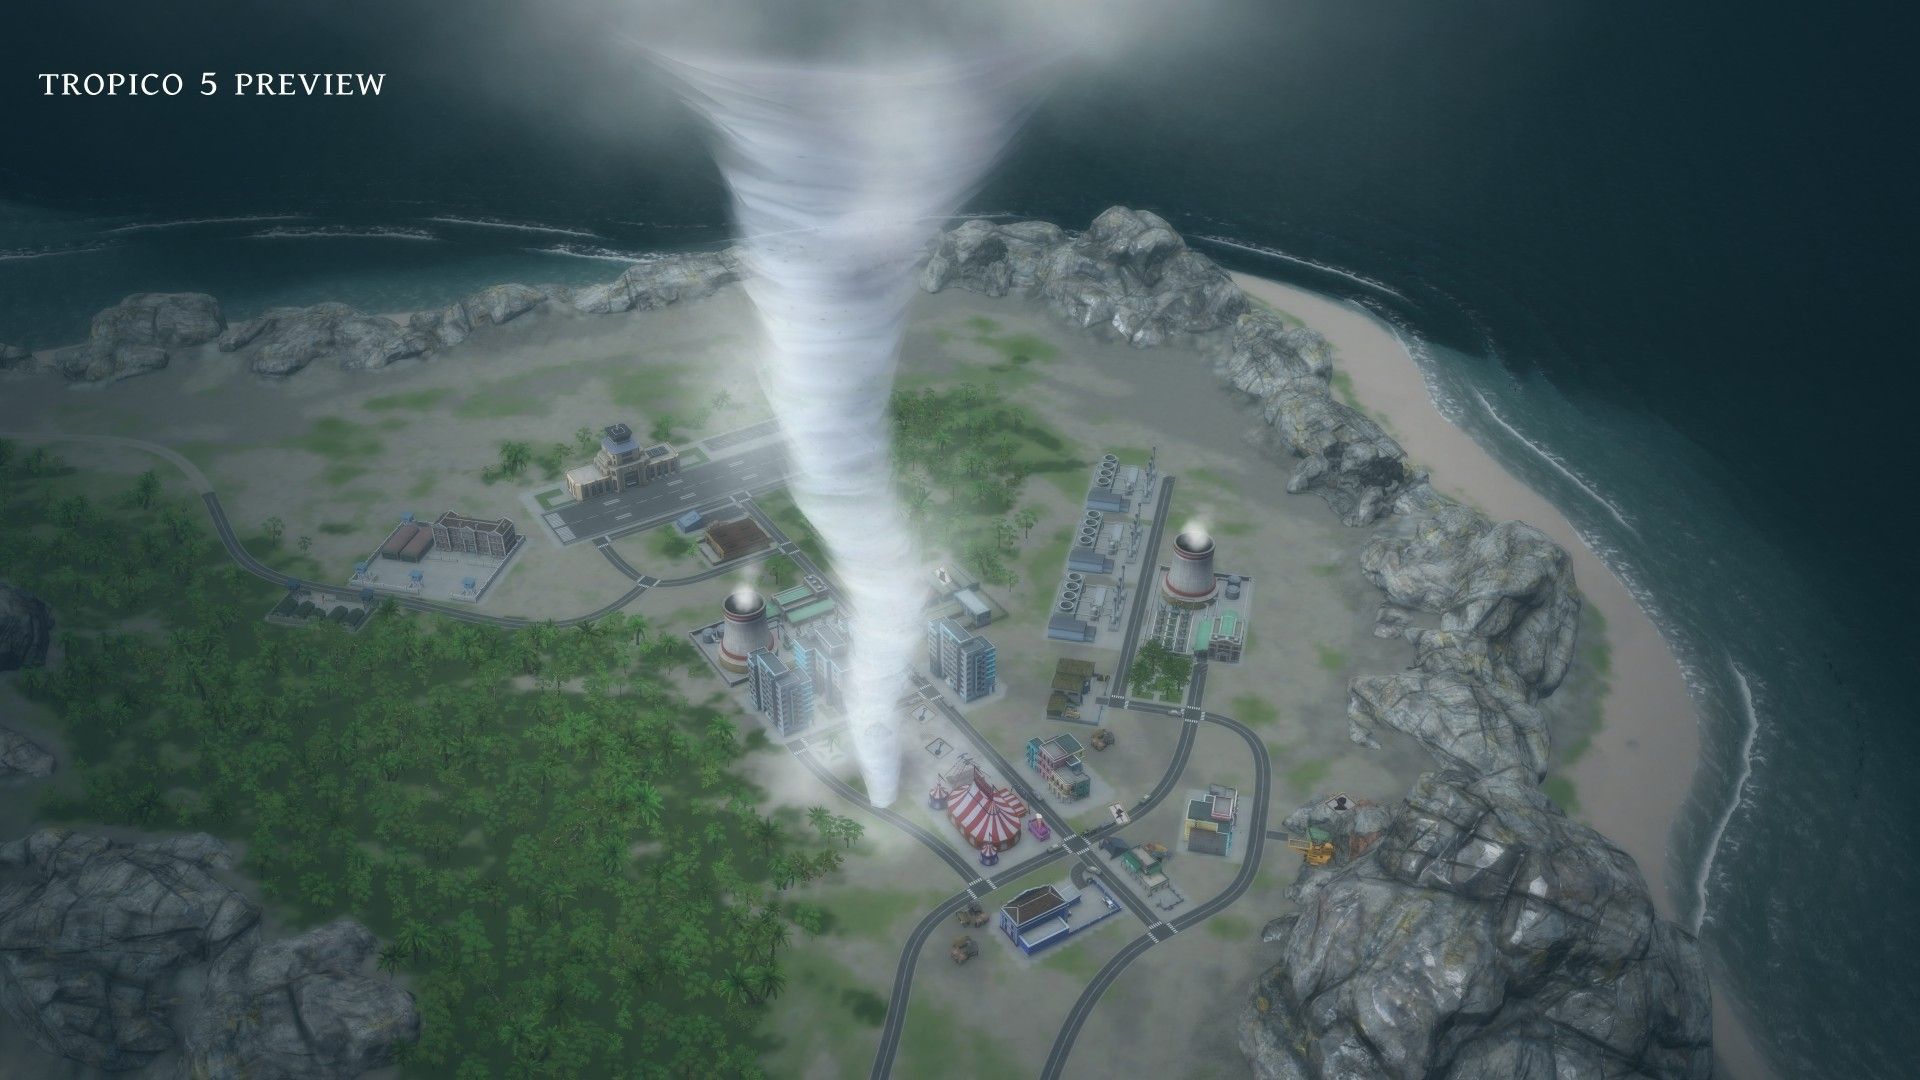 Tornadoes in the game Tropico 5 wallpapers and images - wallpapers ...